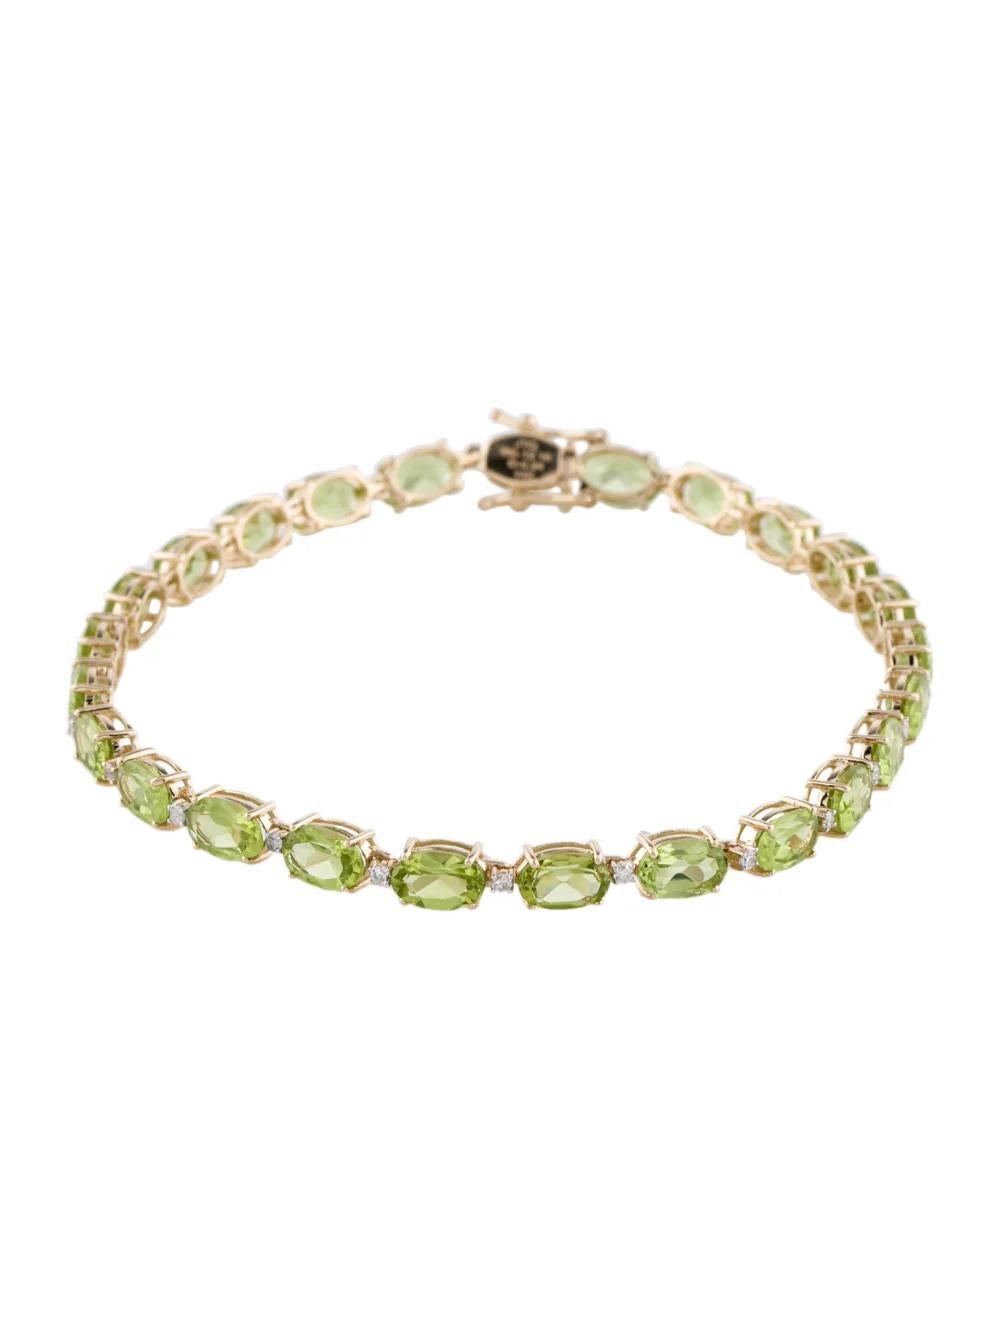 Enhance your wrist with this exquisite 14K Yellow Gold Peridot & Diamond Link Bracelet, featuring a captivating 10.80 Carat Oval Brilliant Peridot. Crafted to perfection, this bracelet exudes elegance and sophistication.

Specifications:

* Metal